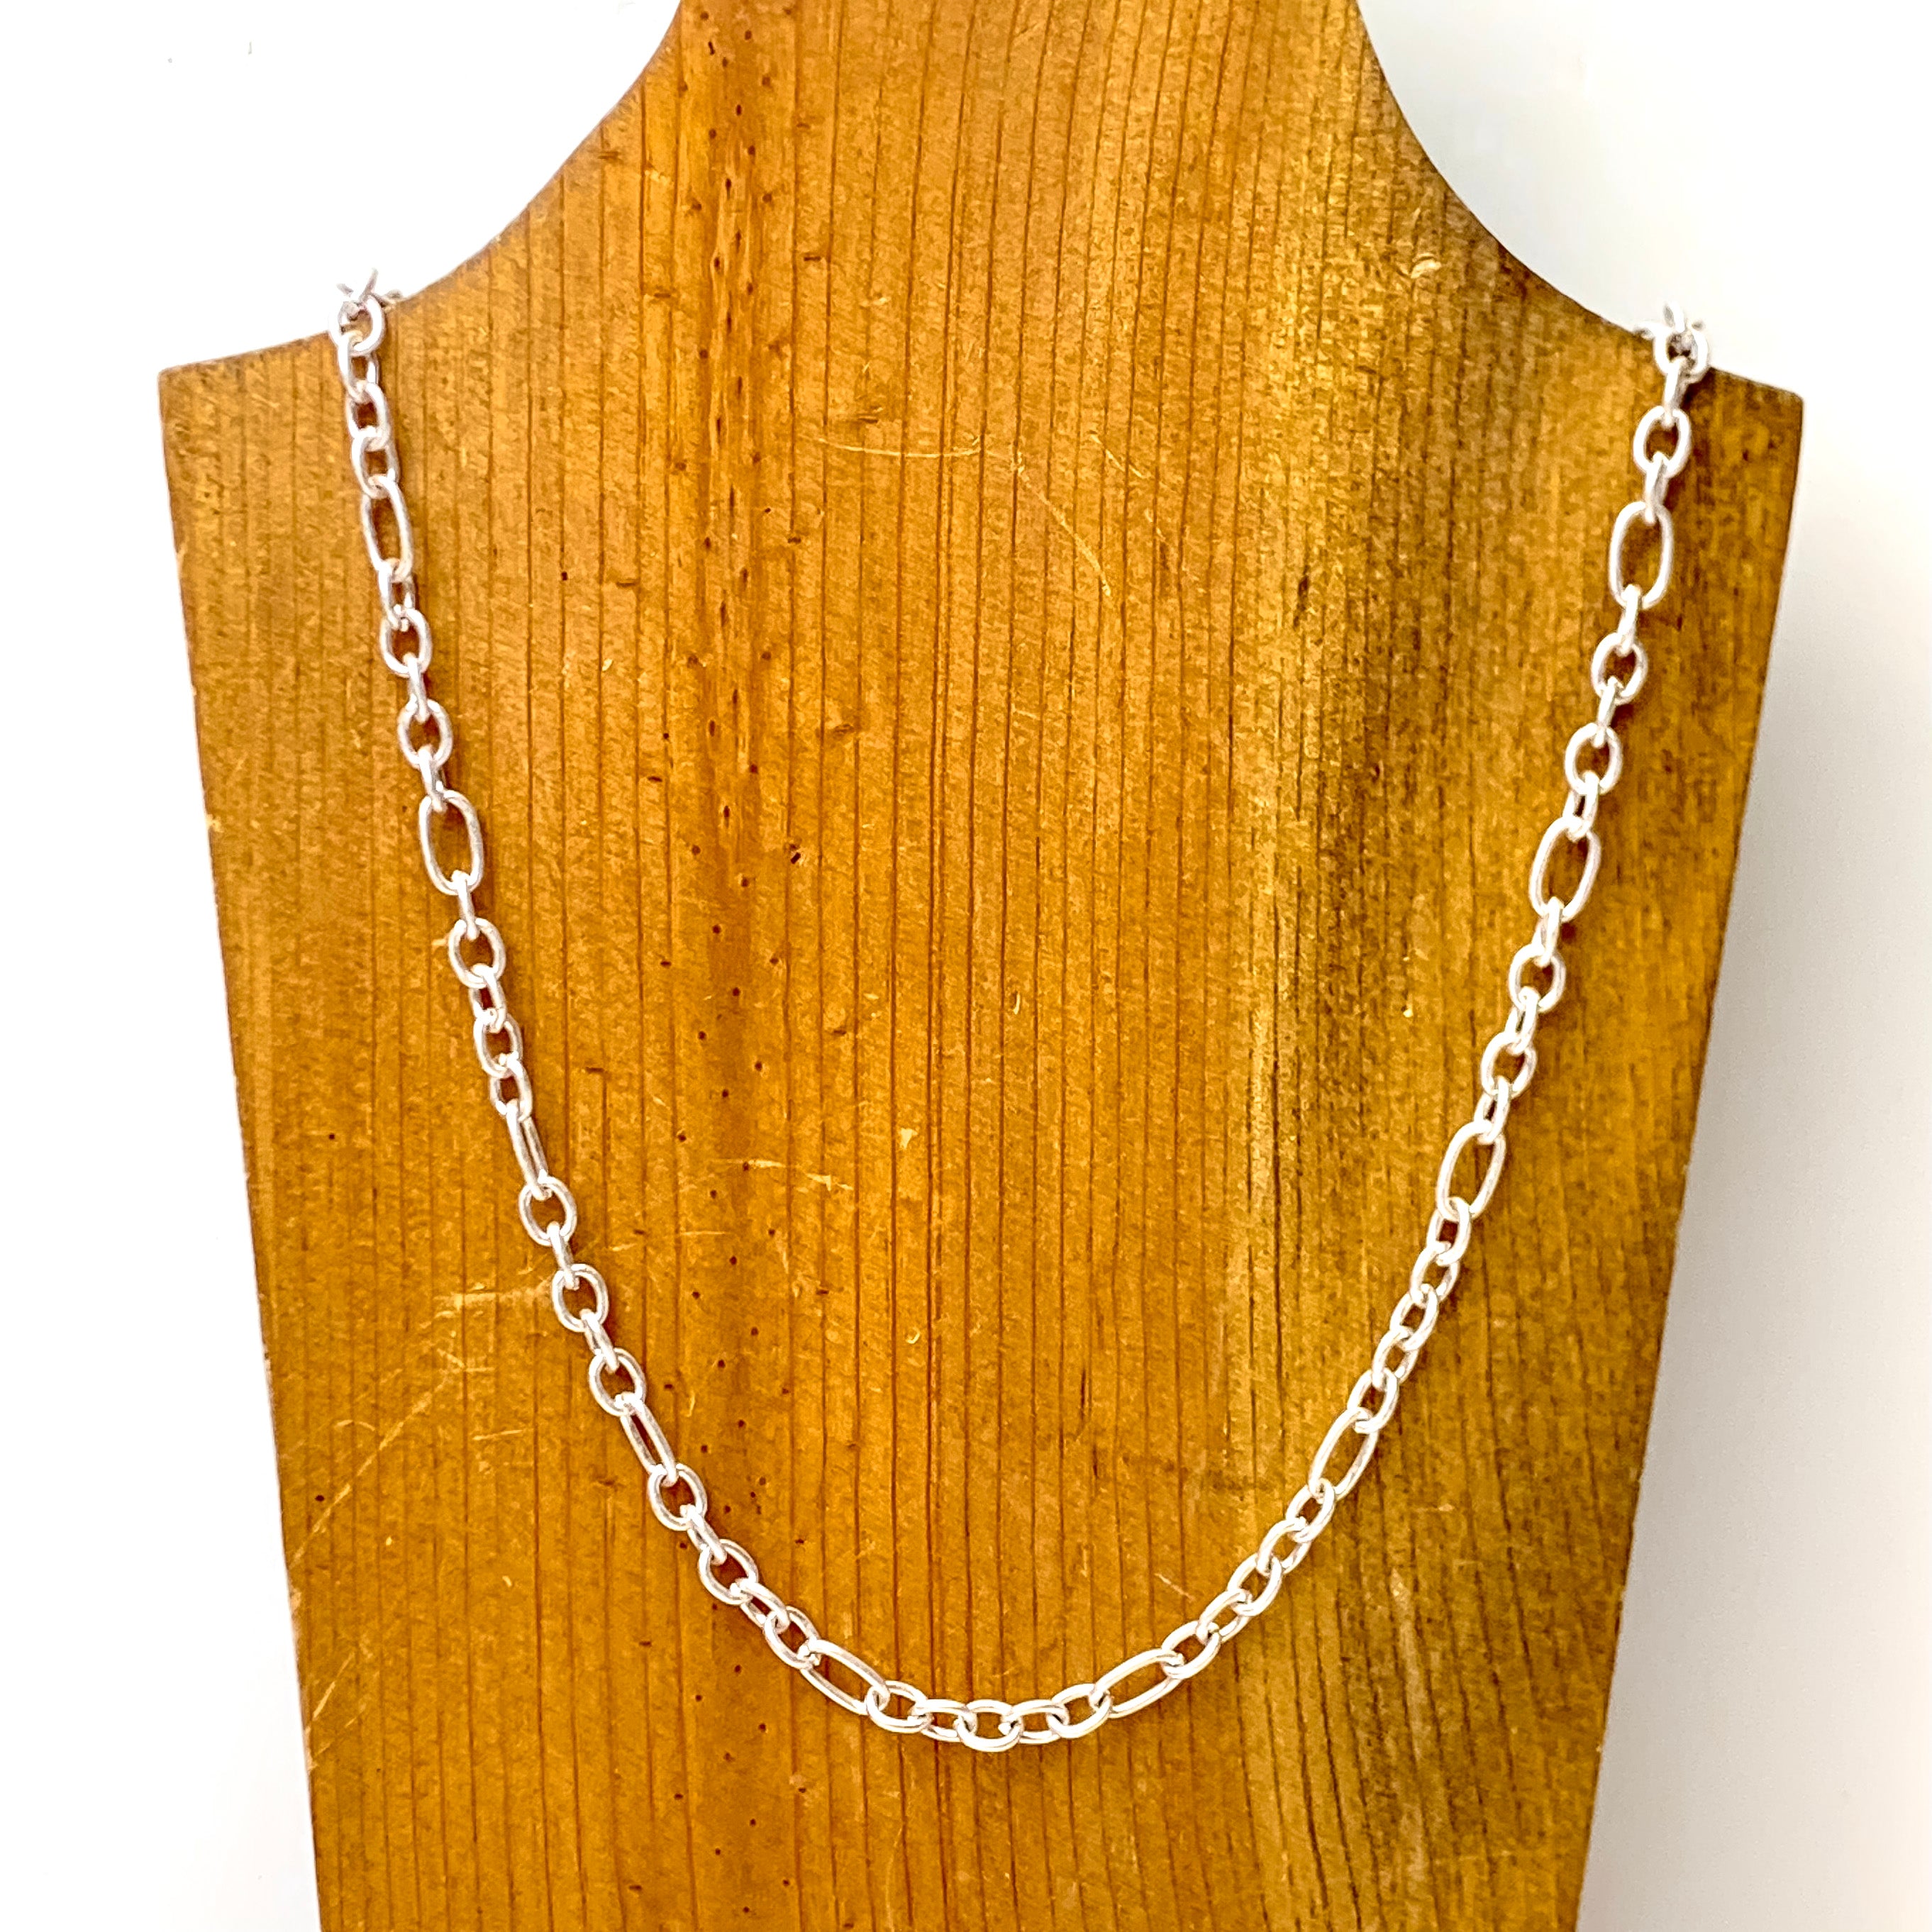 Minimalist Chain Link Necklace in Matte Silver - Giddy Up Glamour Boutique